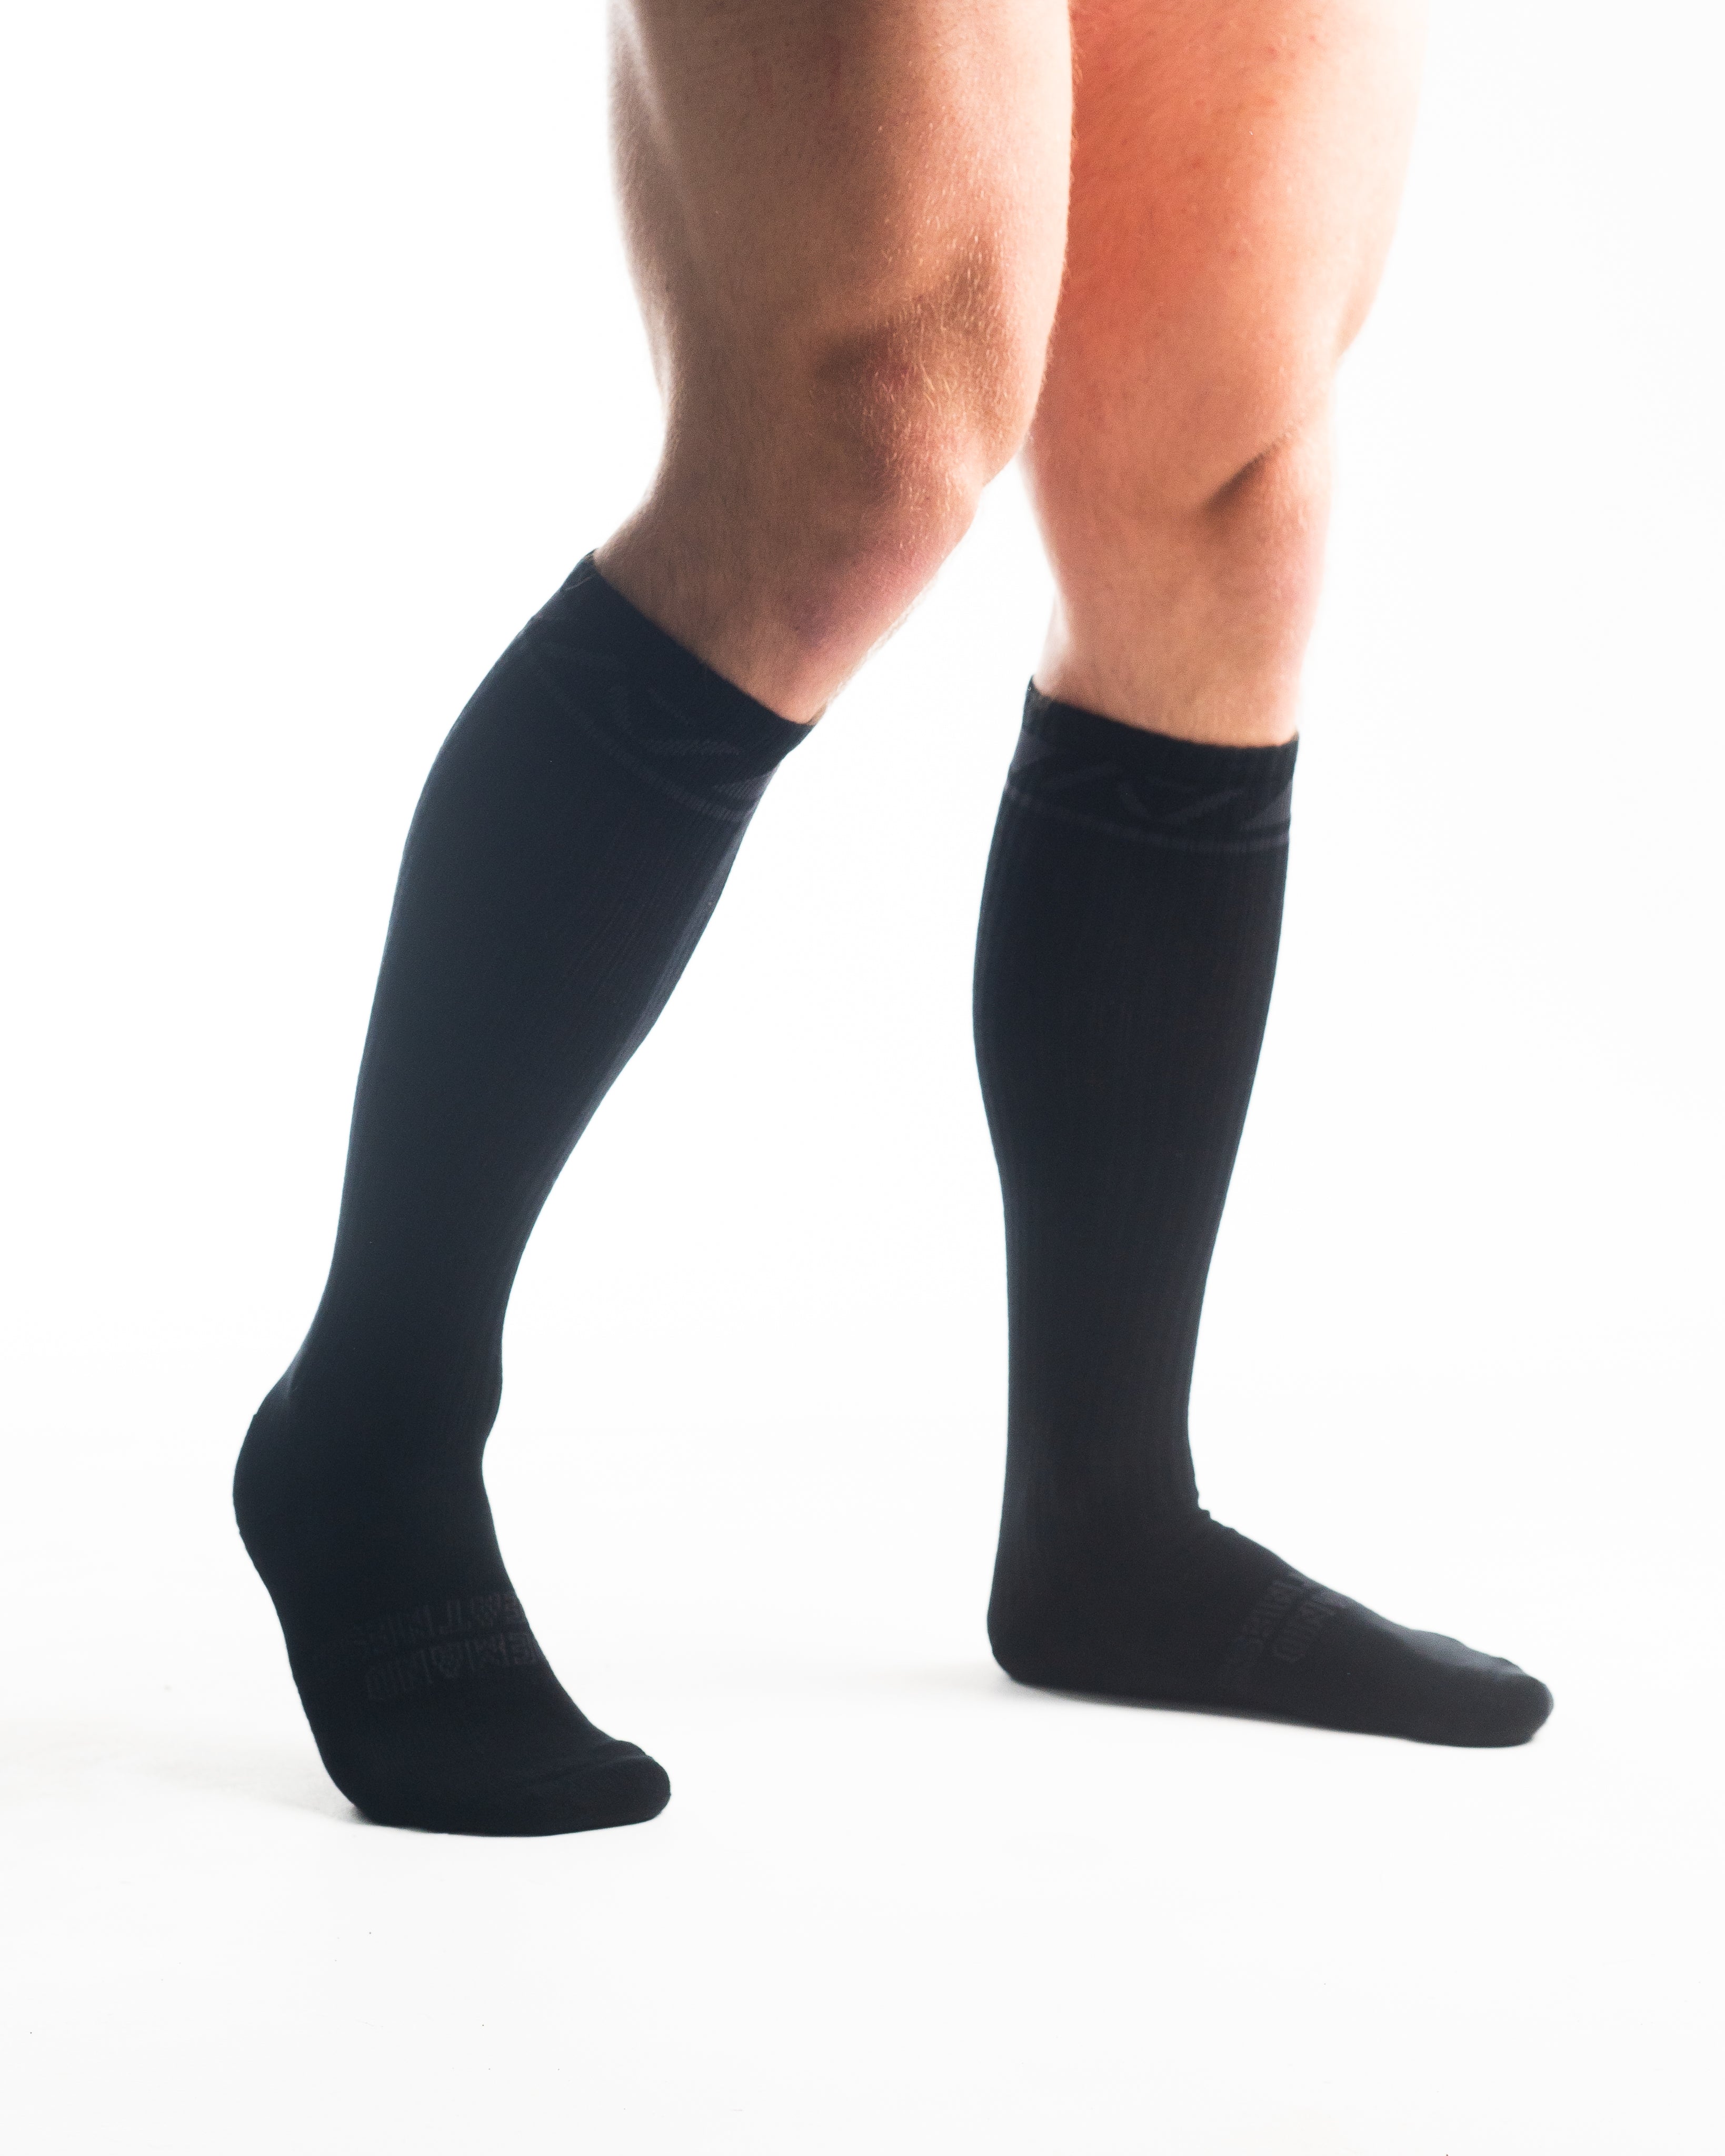 A7 Stealth Deadlift socks are designed specifically for pulls and keep your shins protected from scrapes. A7 deadlift socks are a perfect pair to wear in training or powerlifting competition. The IPF Approved Kit includes Powerlifting Singlet, A7 Meet Shirt, A7 Zebra Wrist Wraps, A7 Deadlift Socks, Hourglass Knee Sleeves (Stiff Knee Sleeves and Rigor Mortis Knee Sleeves). Genouillères powerlifting shipping to France, Spain, Ireland, Germany, Italy, Sweden and EU.